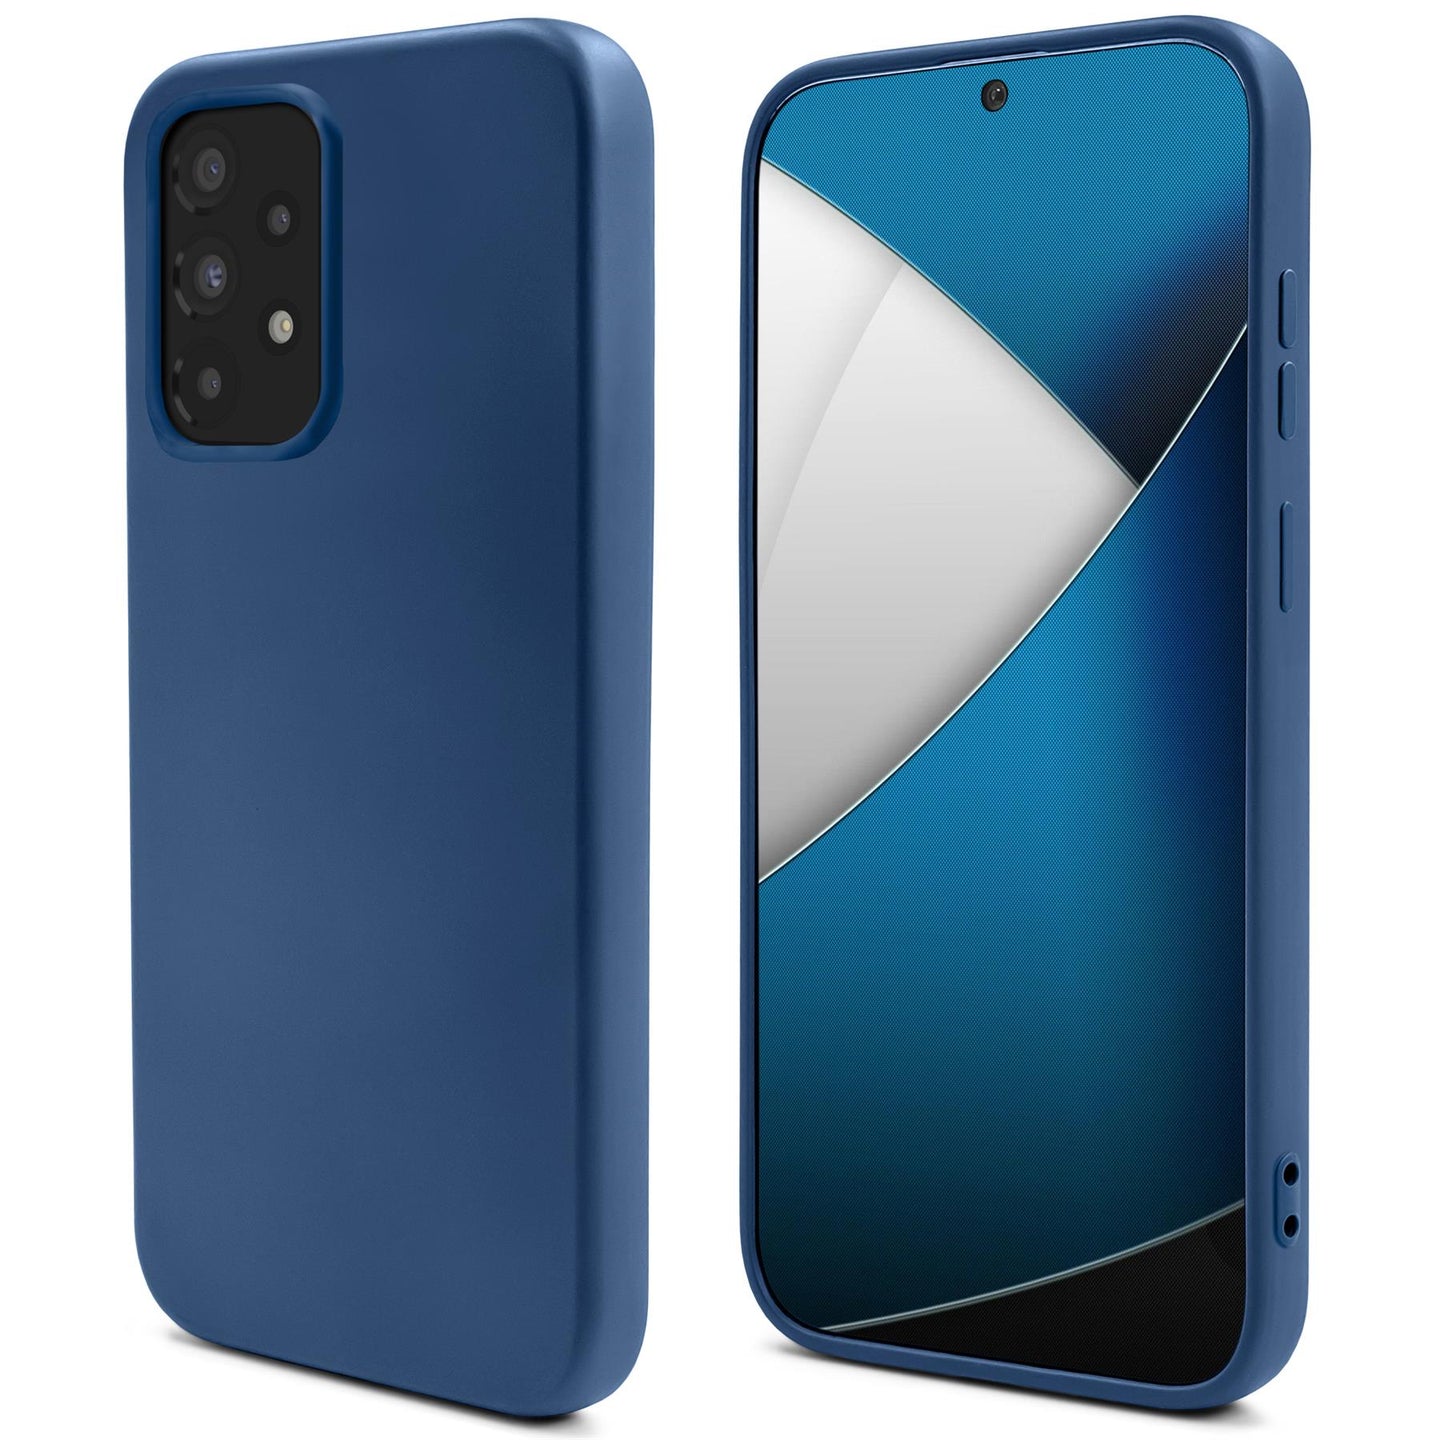 Moozy Lifestyle. Silicone Case for Samsung A33 5G, Midnight Blue - Liquid Silicone Lightweight Cover with Matte Finish and Soft Microfiber Lining, Premium Silicone Case